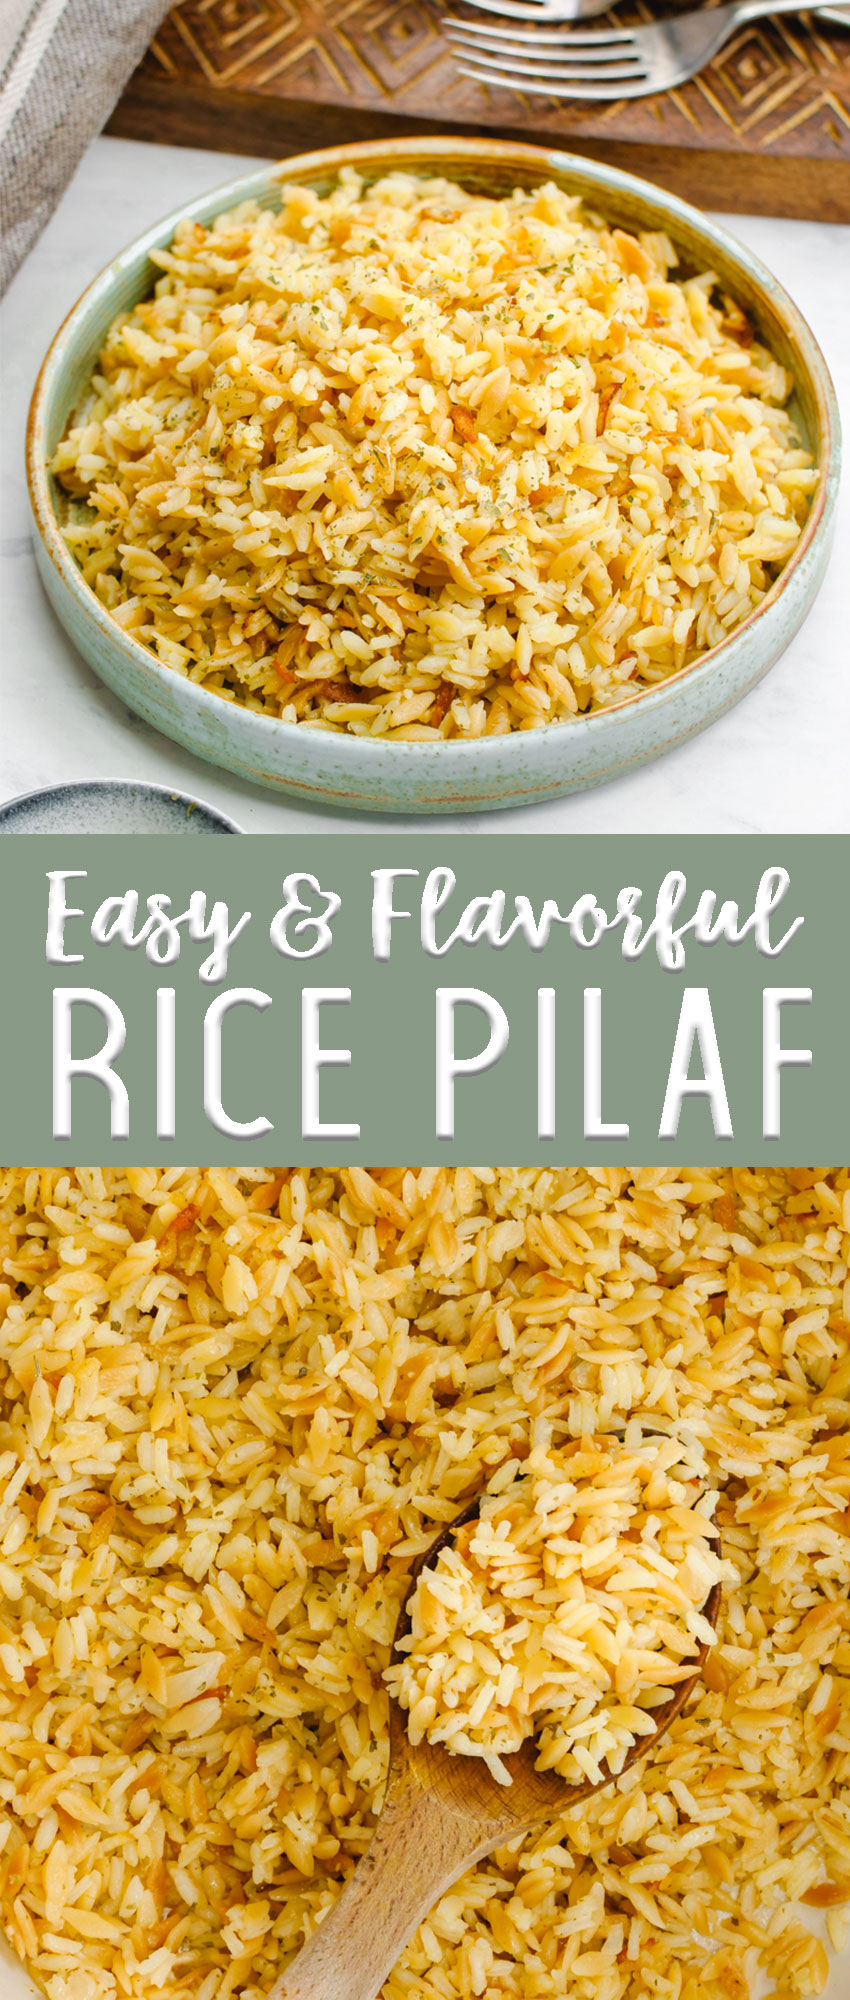 Easy rice pilaf makes the perfect side dish for any meal